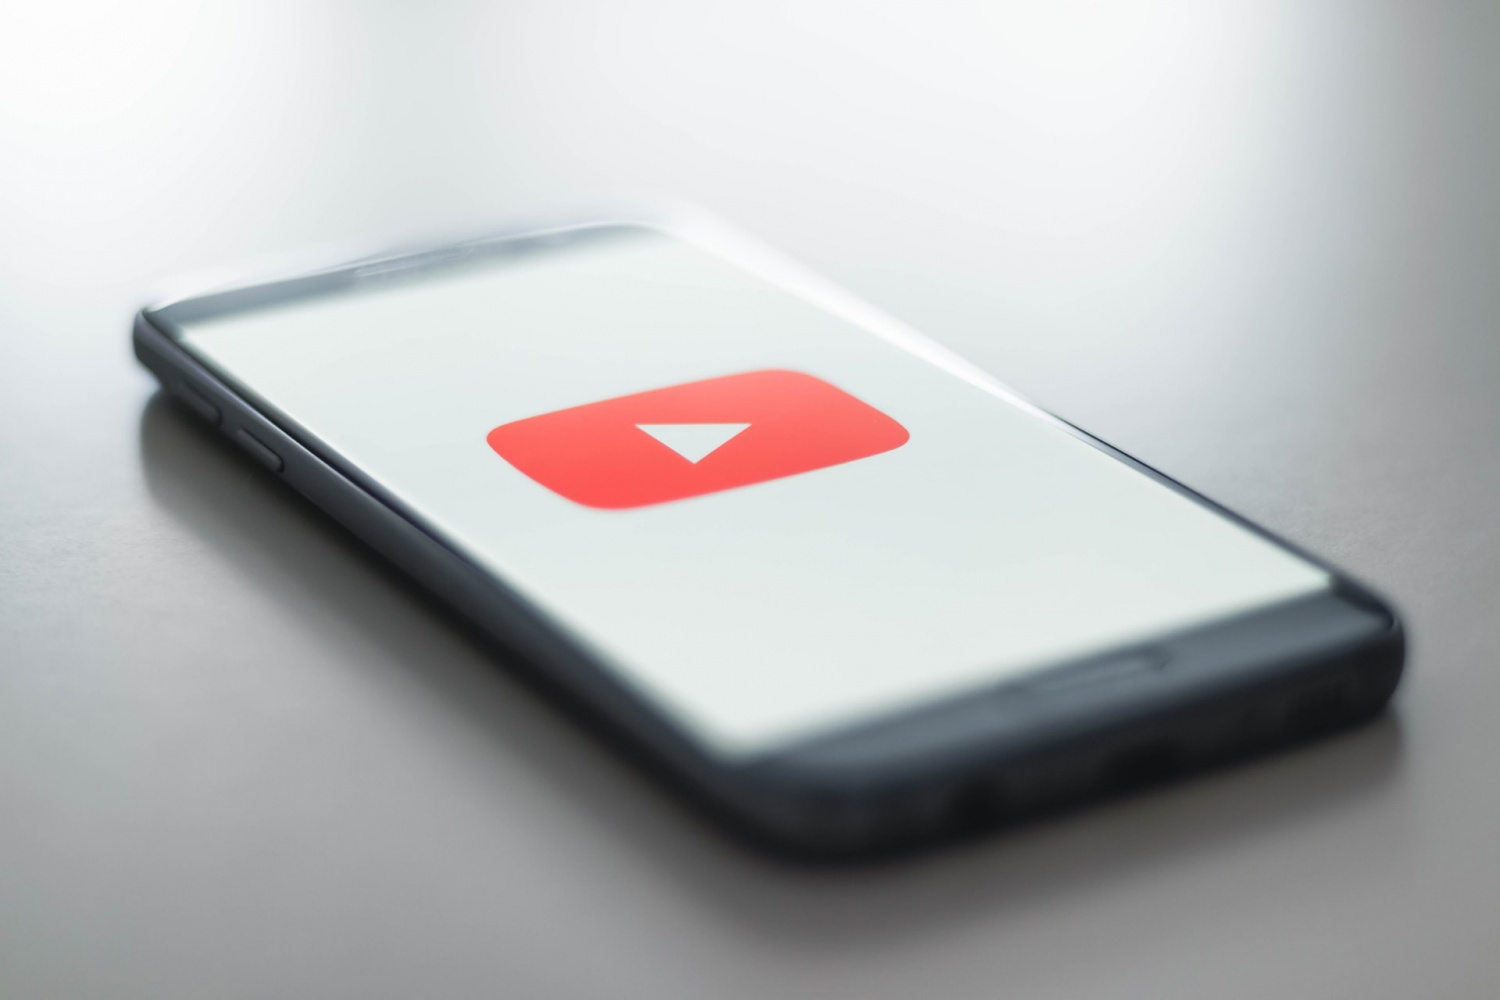 YouTube Videos Setting for Android and iOS: How to Activate New Data-Saving Feature on Your Mobile